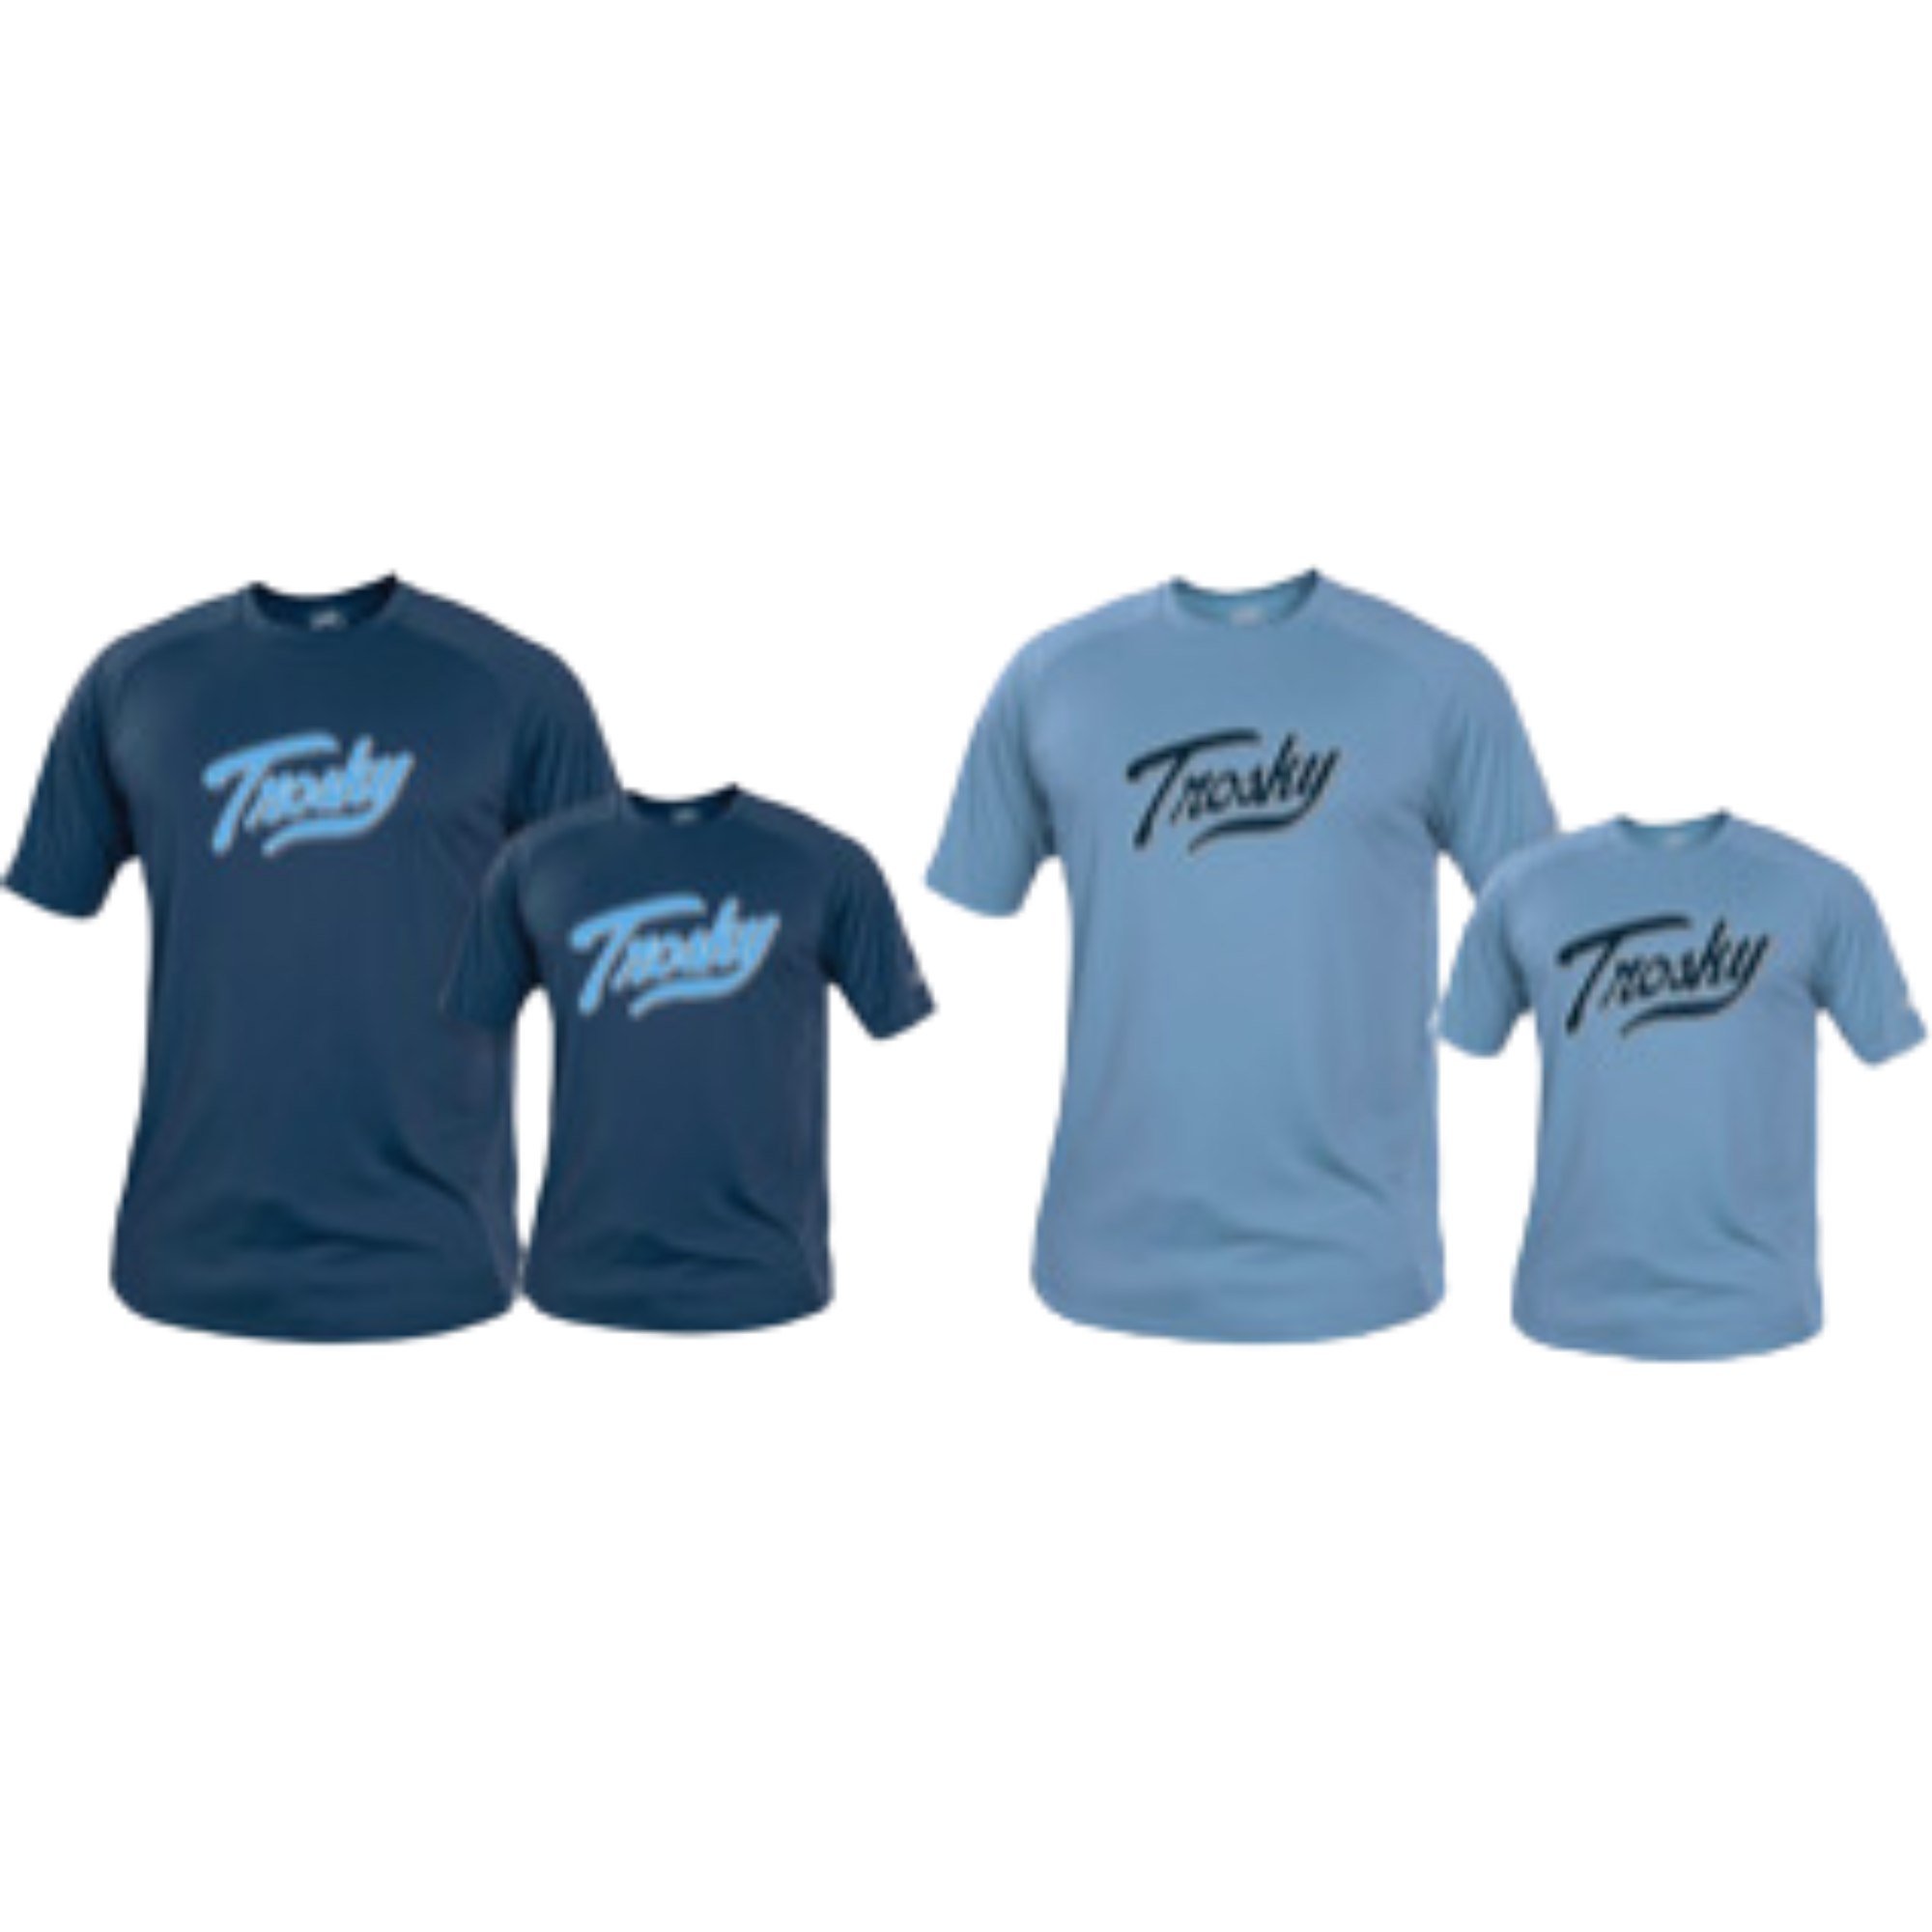 Rawlings Adult Trosky Fan Gear Numbered Performance Tee (set of 2 Col. Blue & Navy) - XL